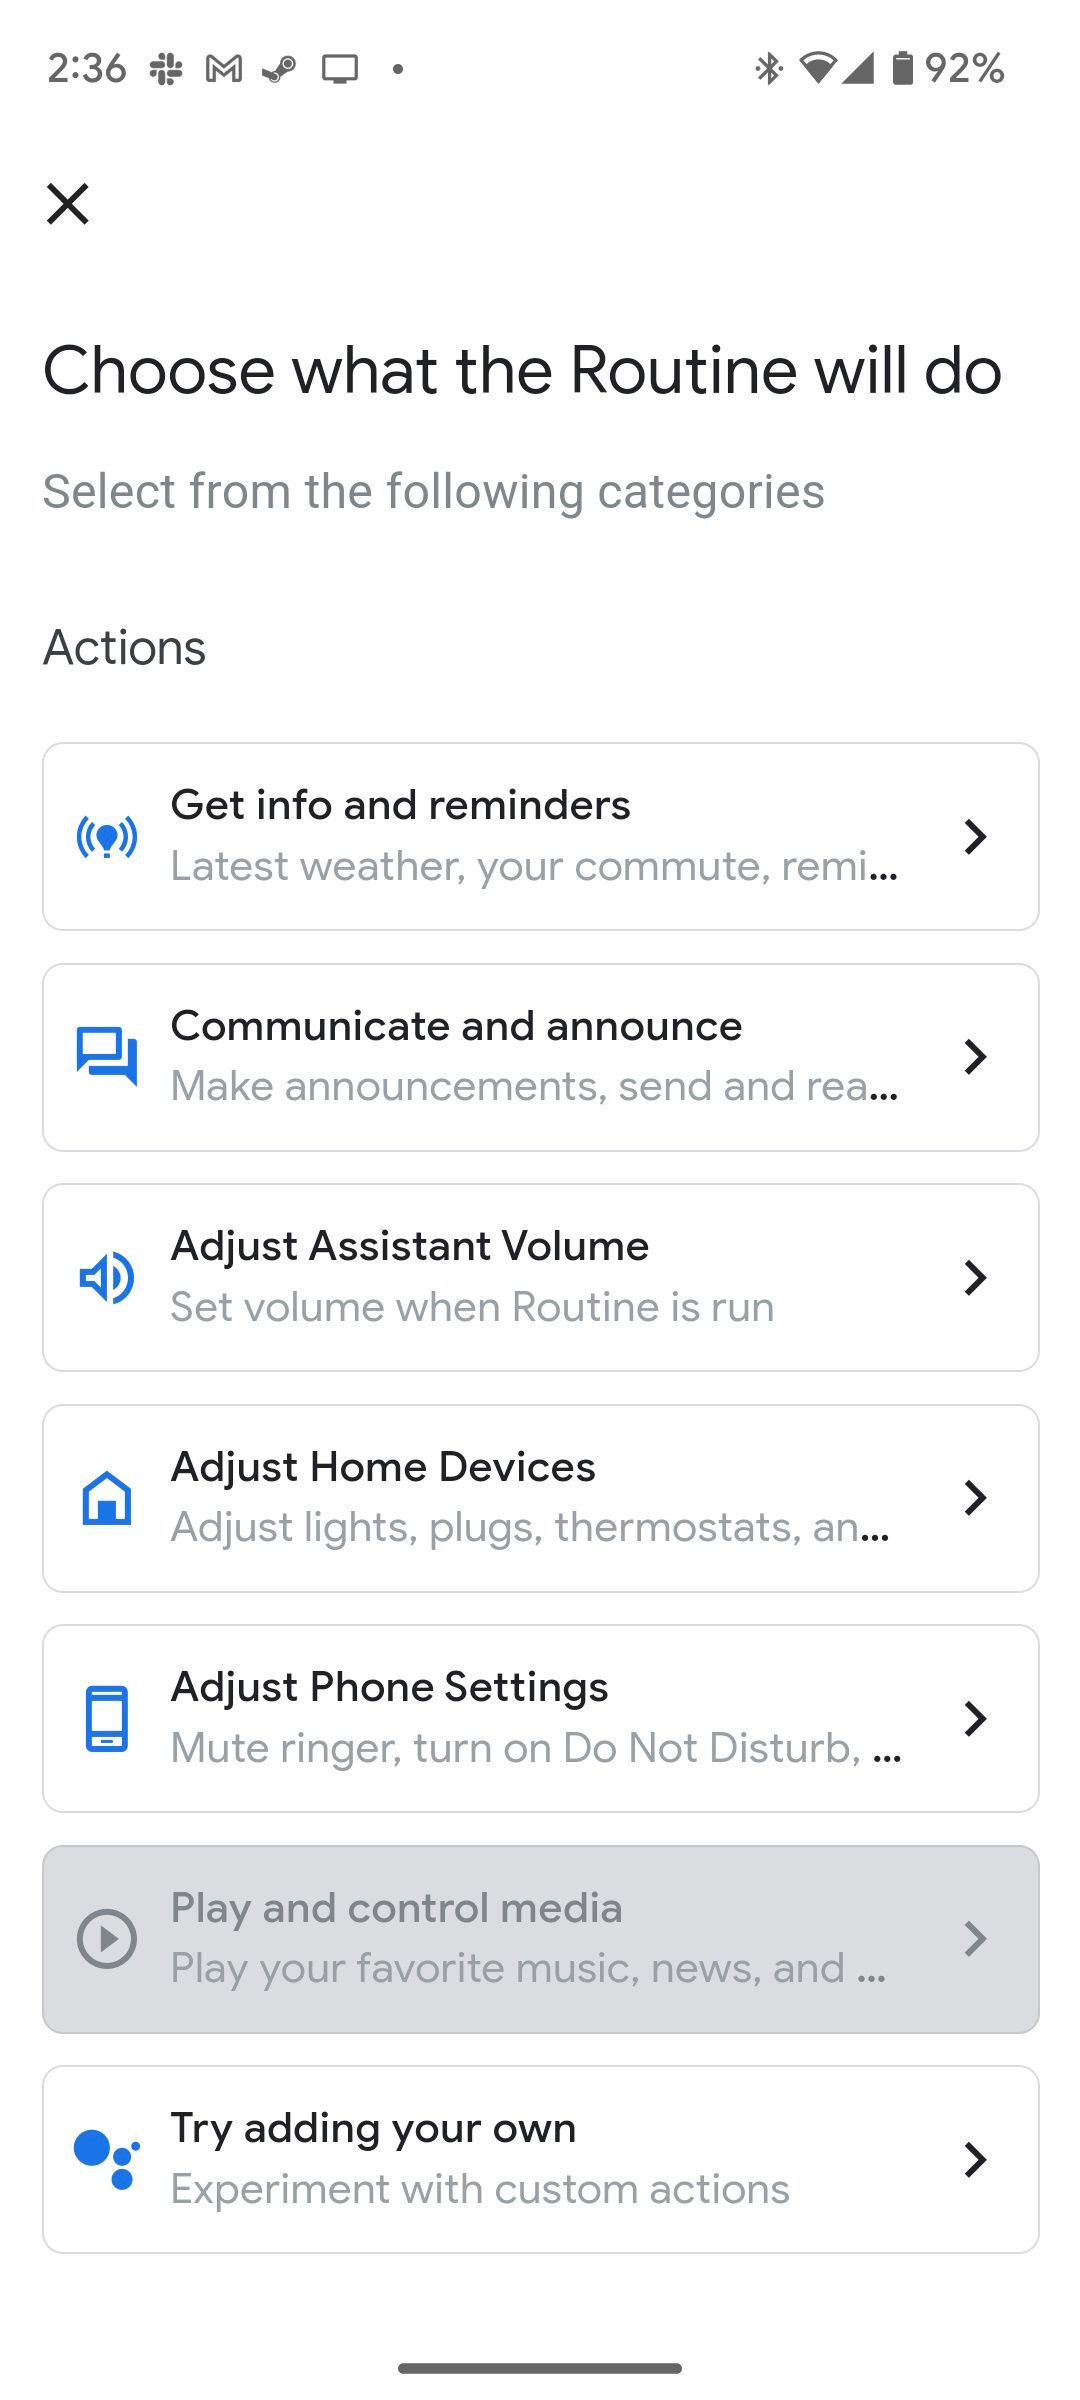 Adjusting the home devices section of the Google Assistant Routine page